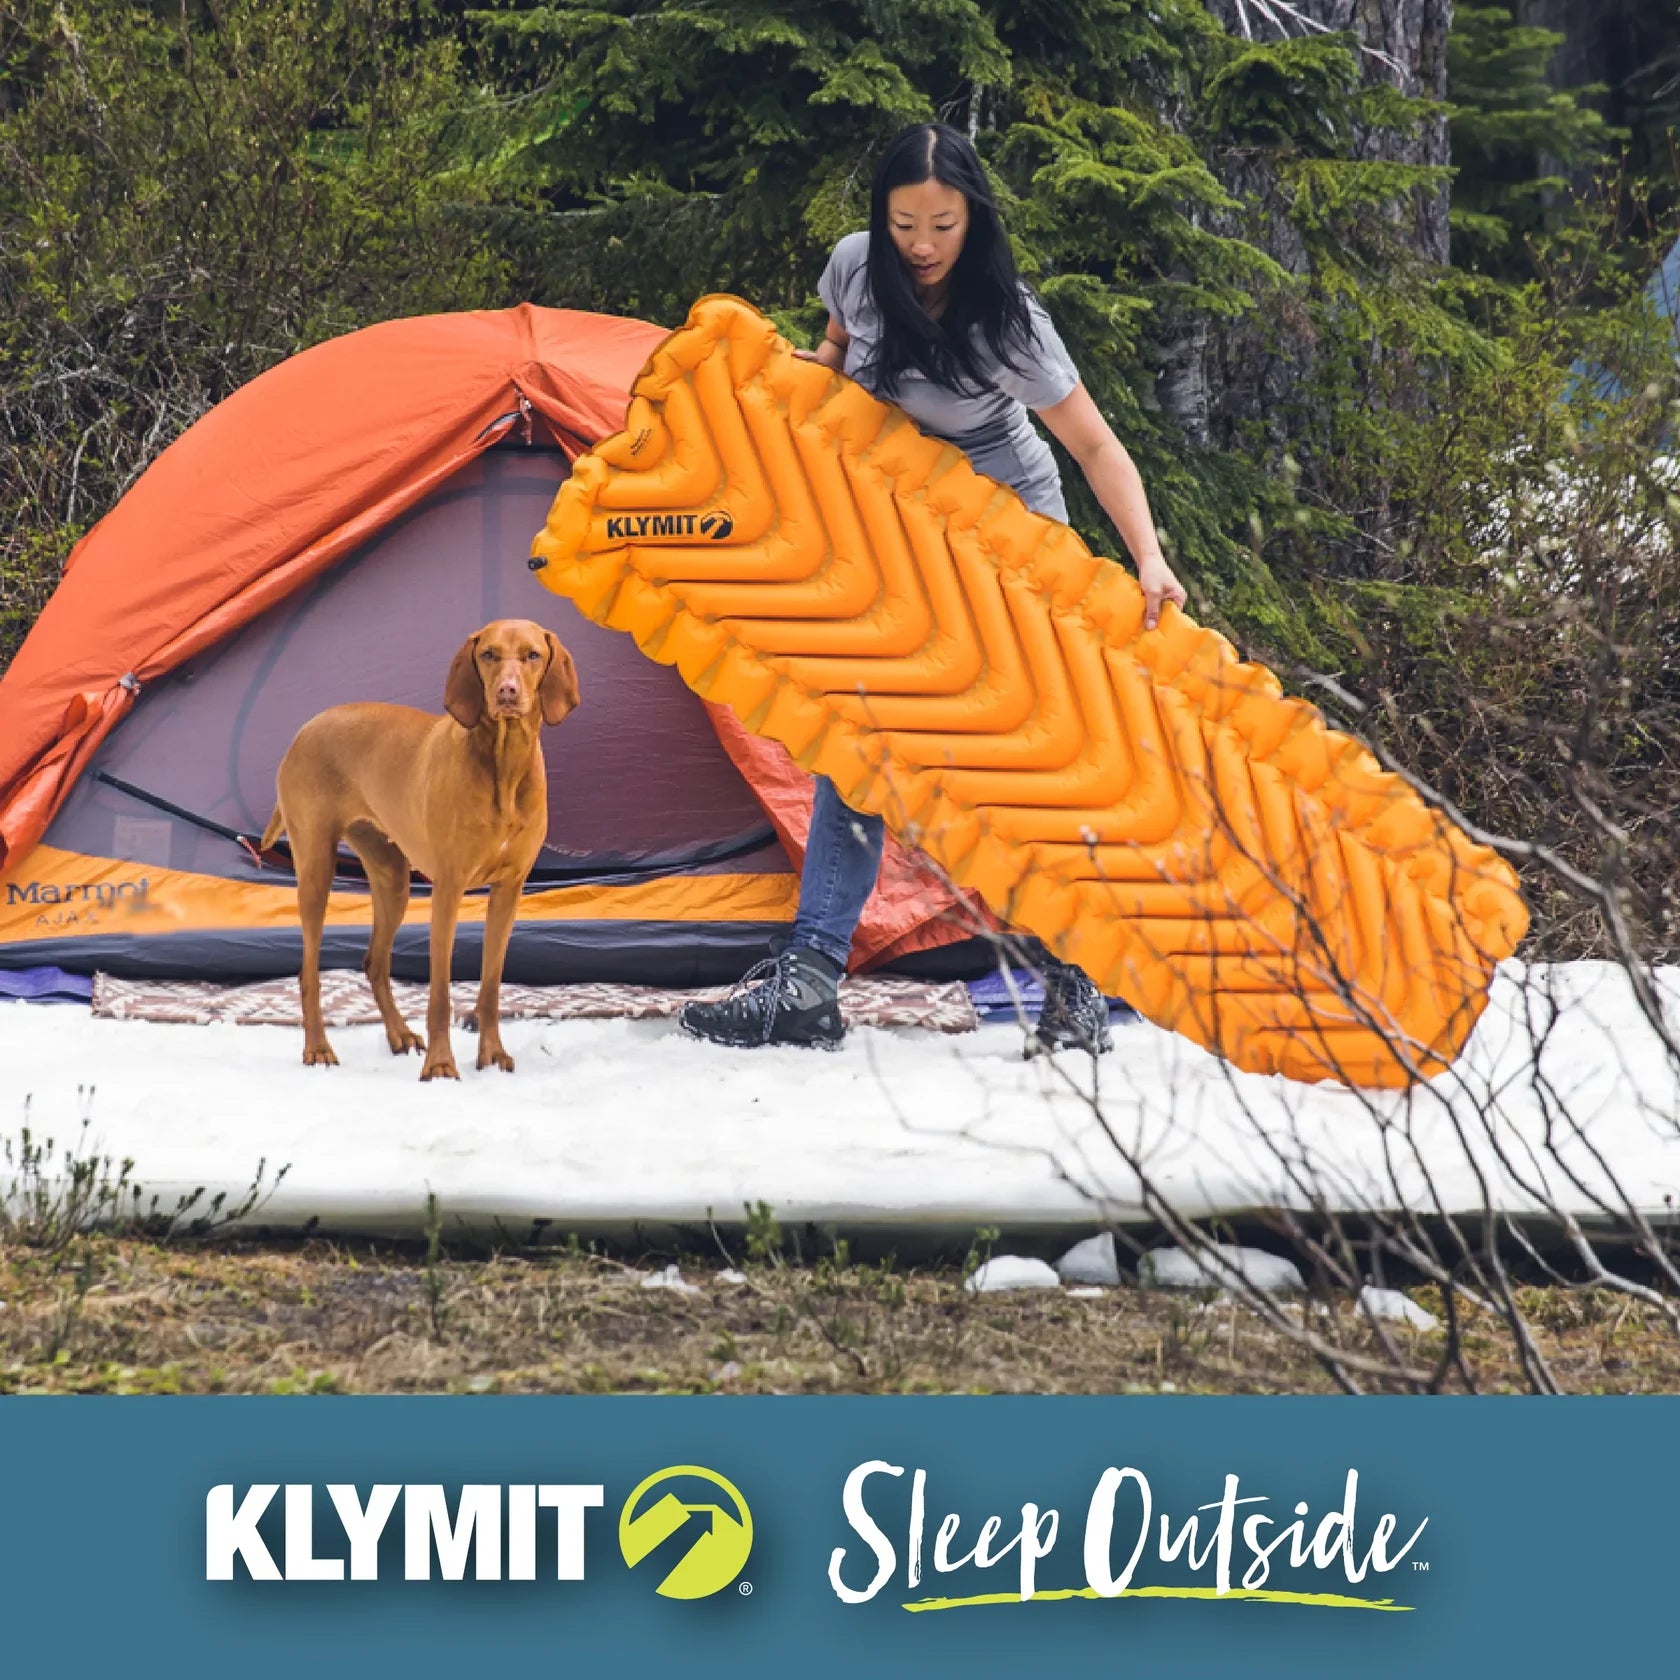 Klymit Insulated Static V Lite™ - 4-season comfort with a 4.4 R-value. Lightweight and compact design for backpackers. Klymalite™ insulation for warmth. Durable 30D polyester material. Ideal dimensions of 72 x 23 x 2.5 in